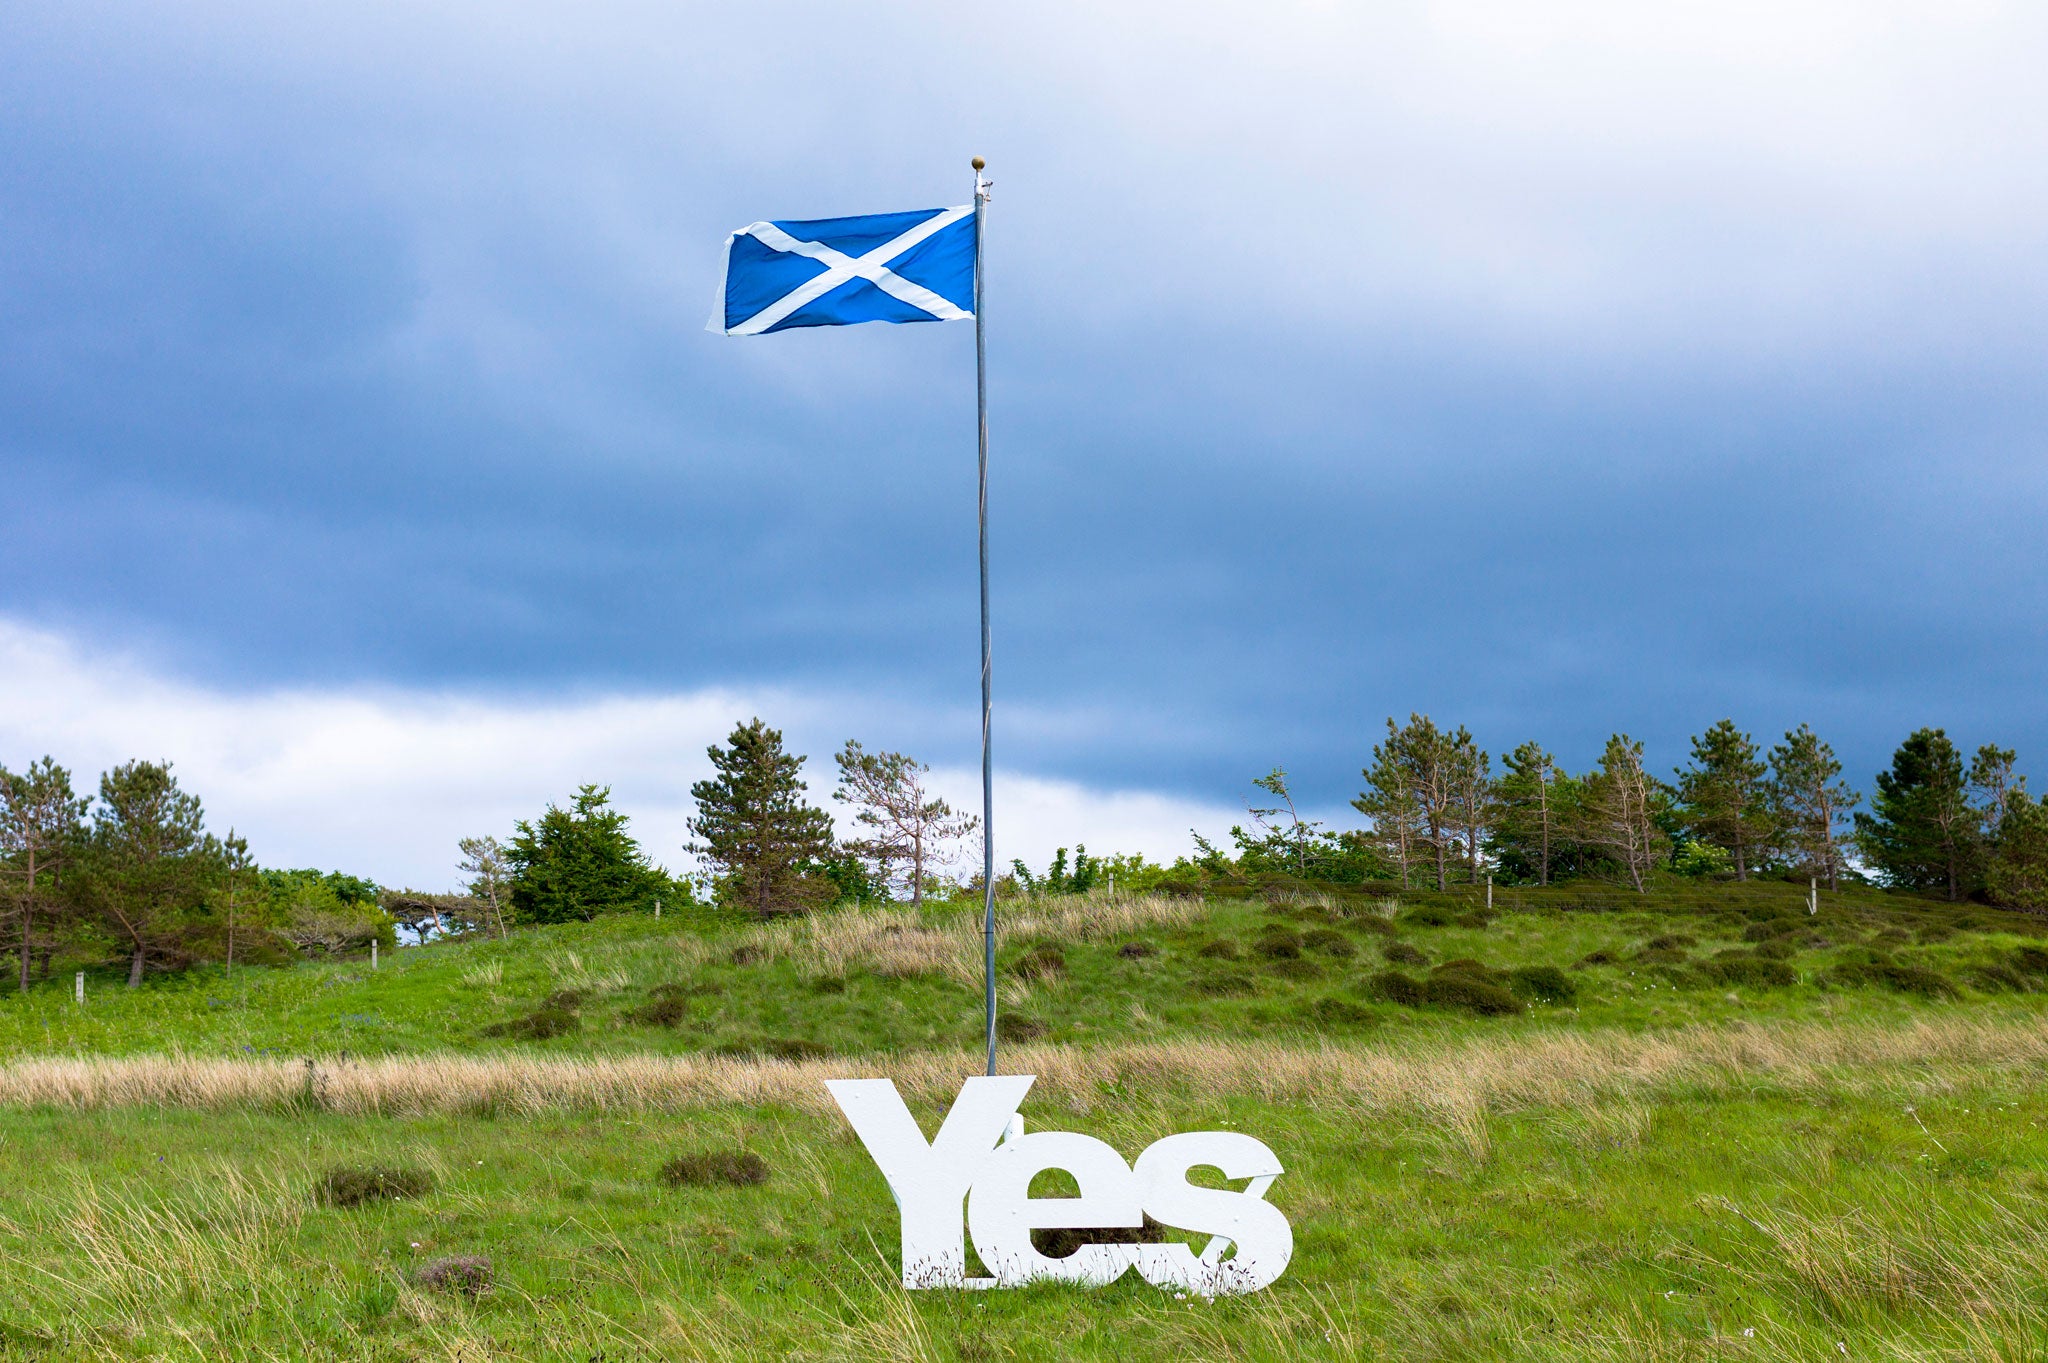 The Saltire flying high in an image from the pro-independence 'yes' campaign